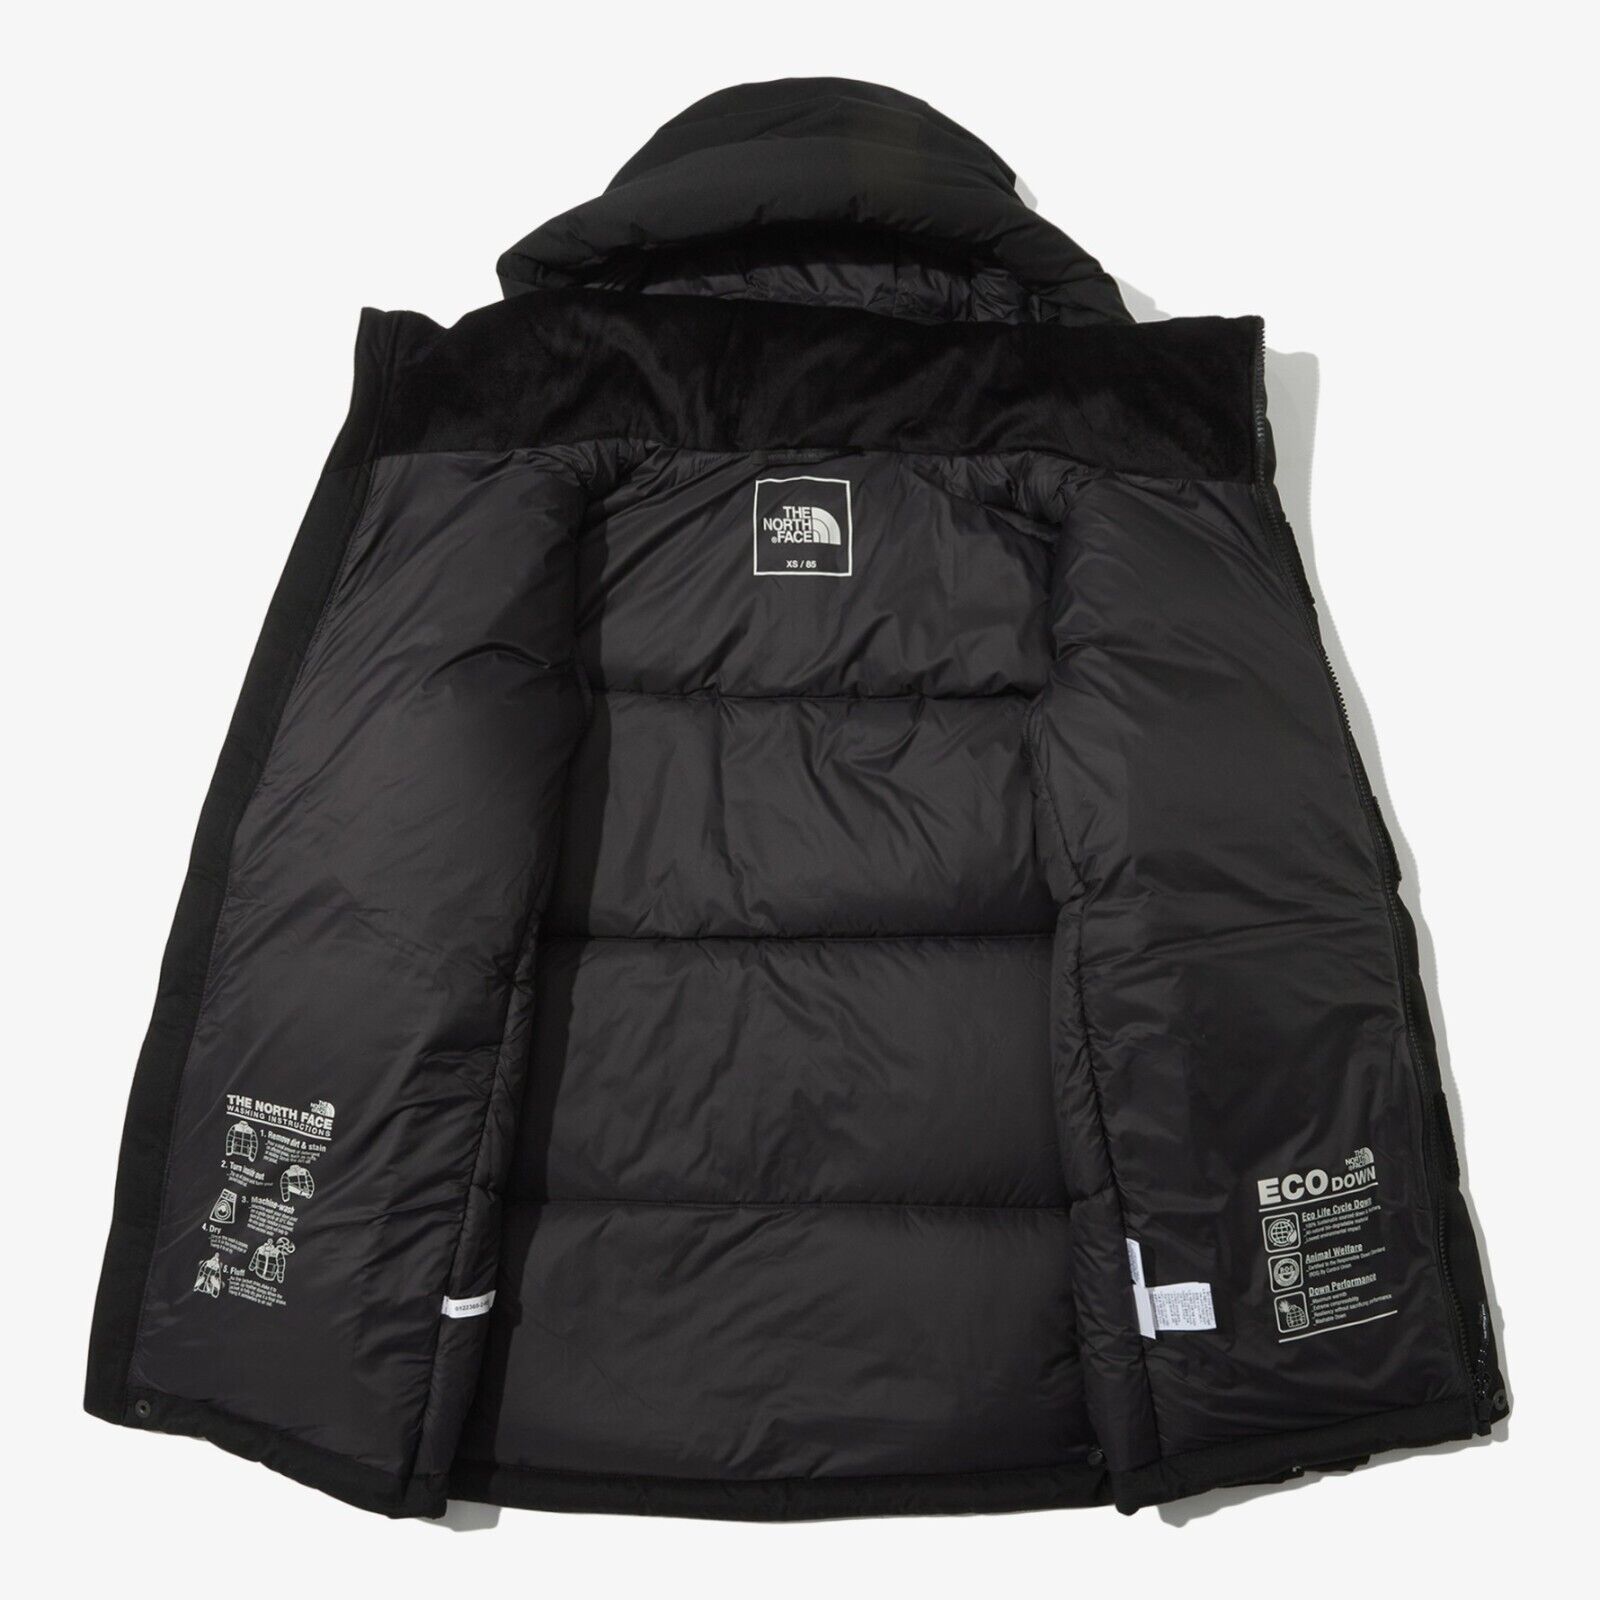 The North Face CHALLENGE AIR DOWN JACKET | eBay